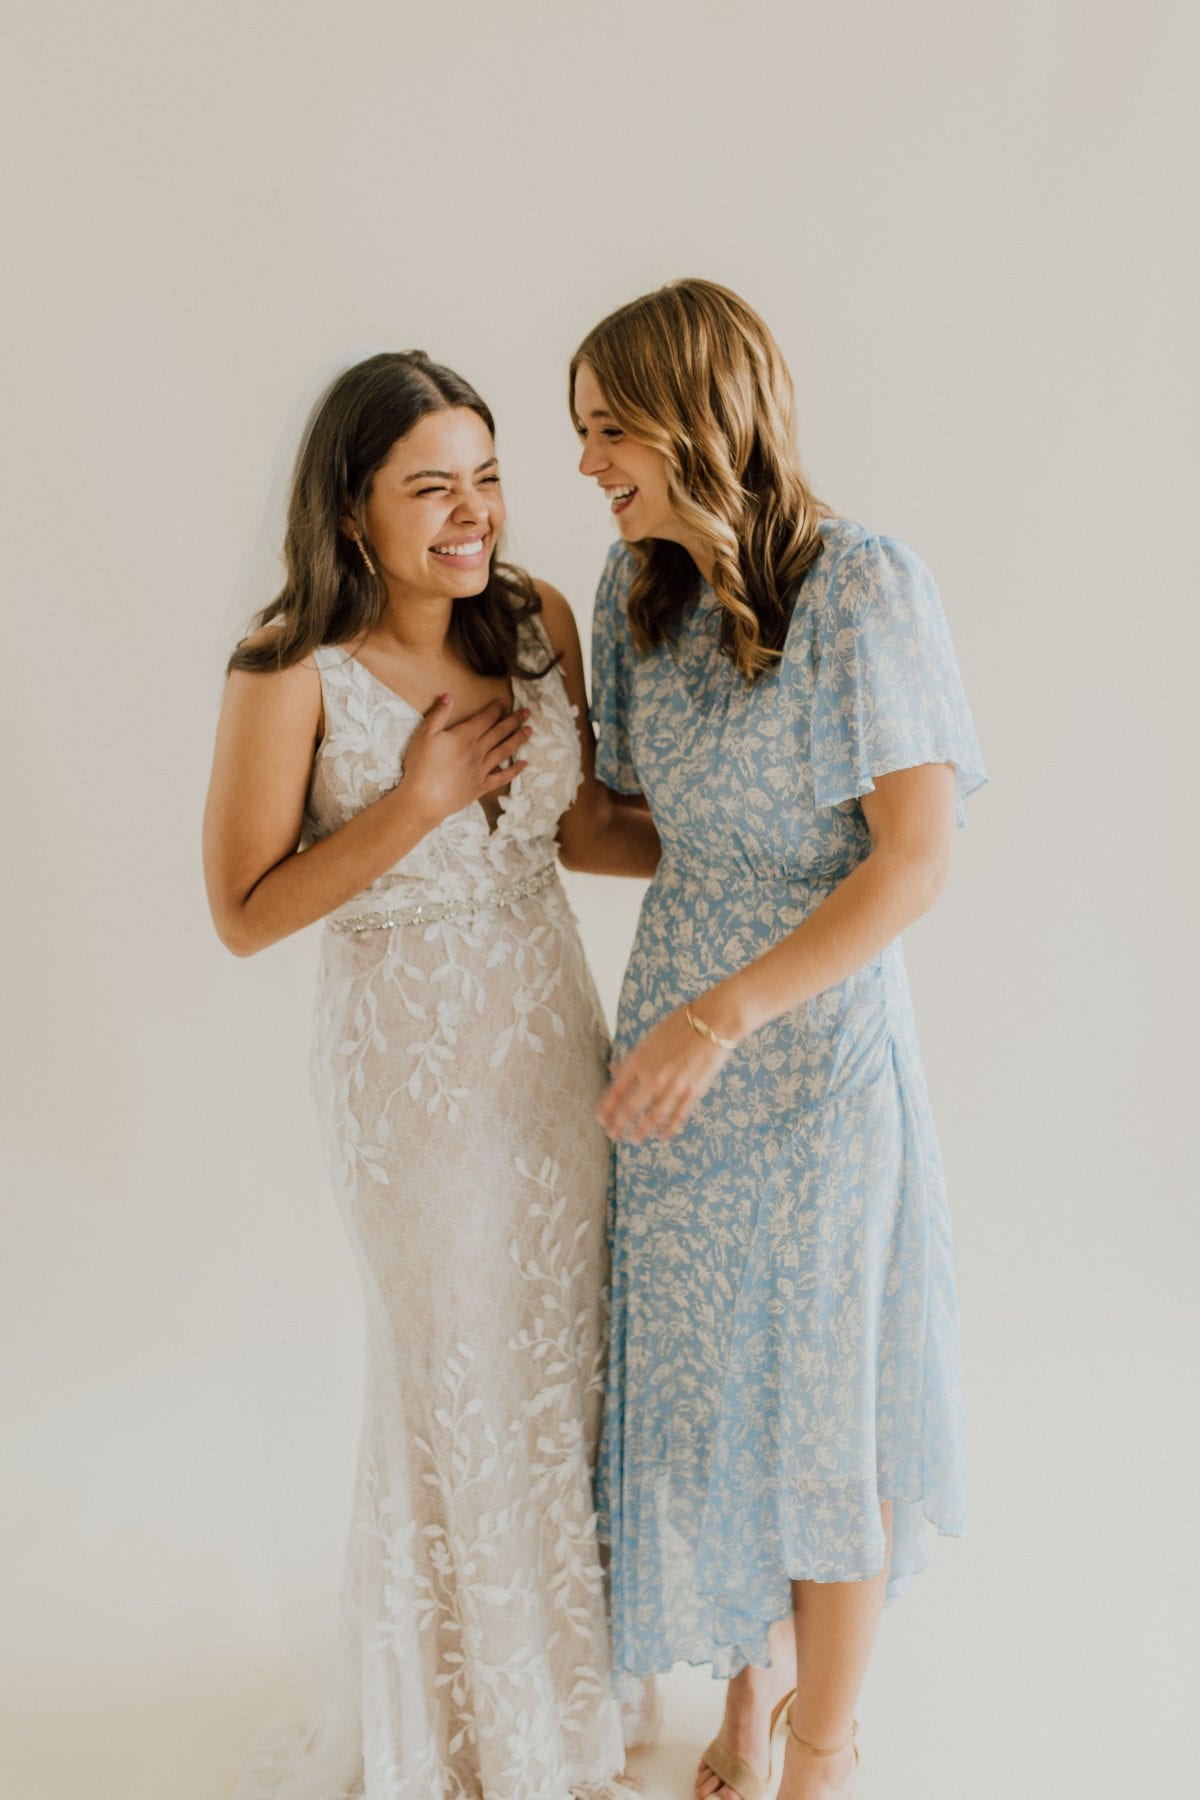 Bride and Maid of Honor laugh together